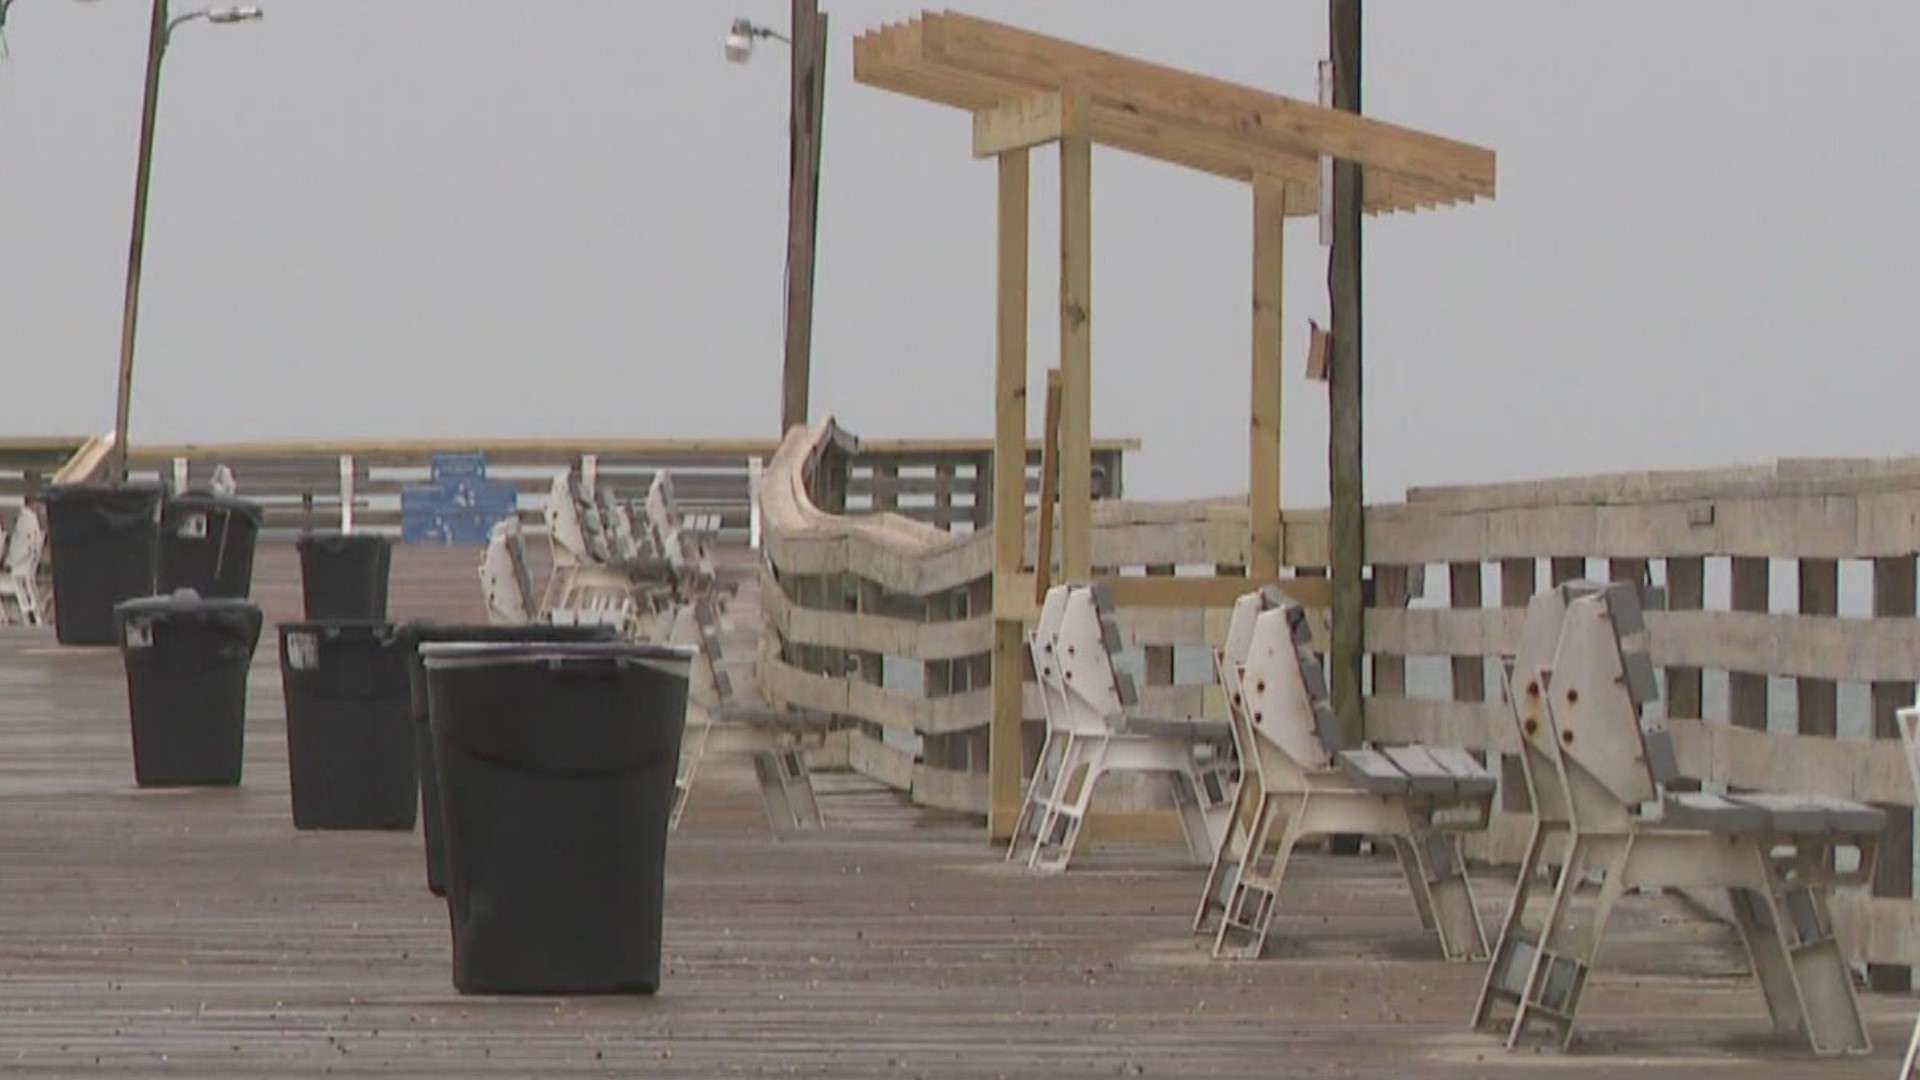 13News Now Connor Rhiel learned more about the upcoming renovations to the Virginia Beach Fishing Pier.